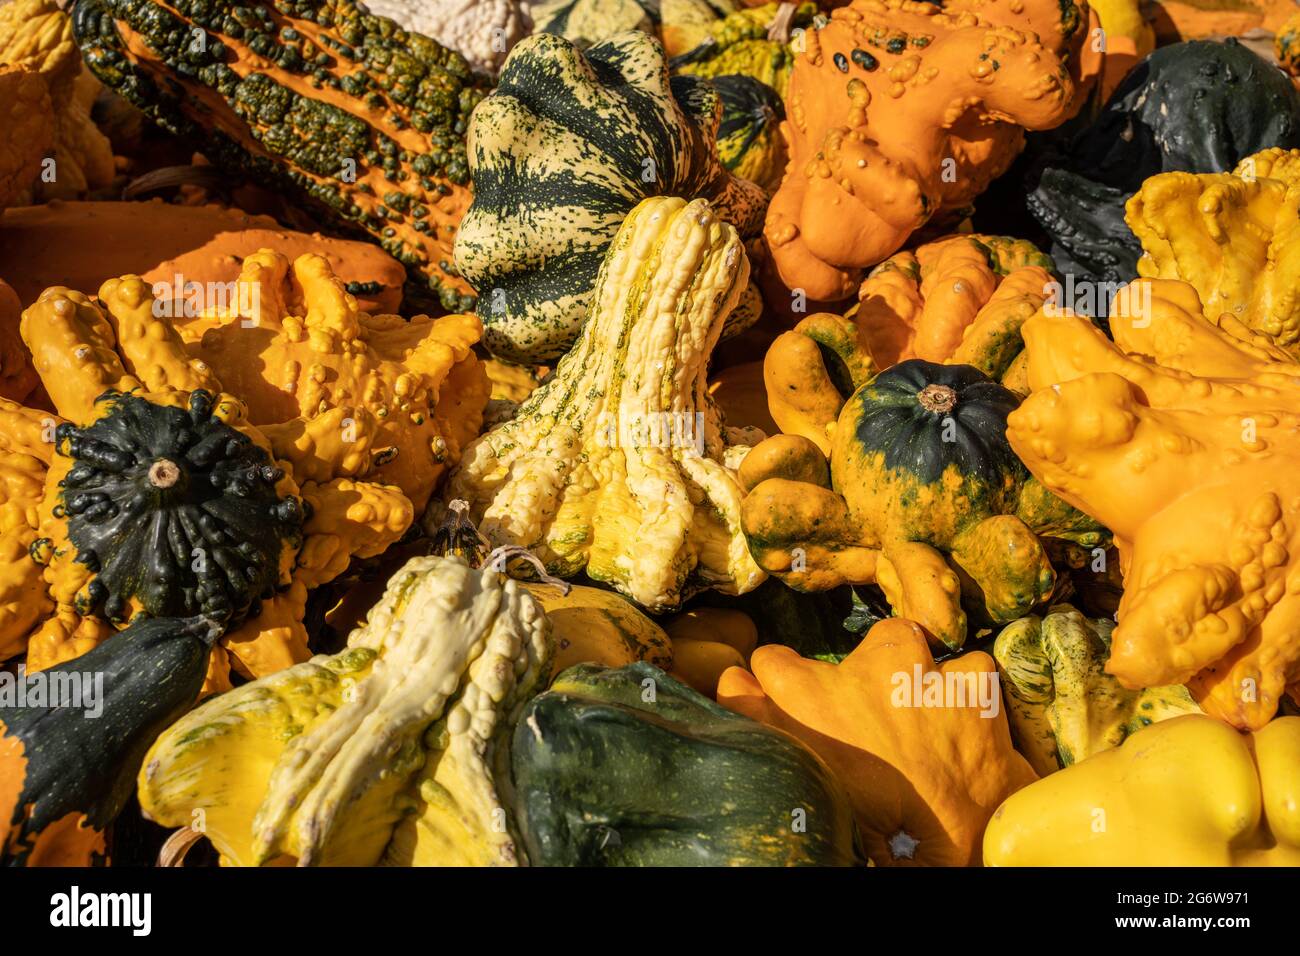 Orange, yellow and green grouds on sale at local orchard ready for Halloween and Thanksgiving decorations. Stock Photo